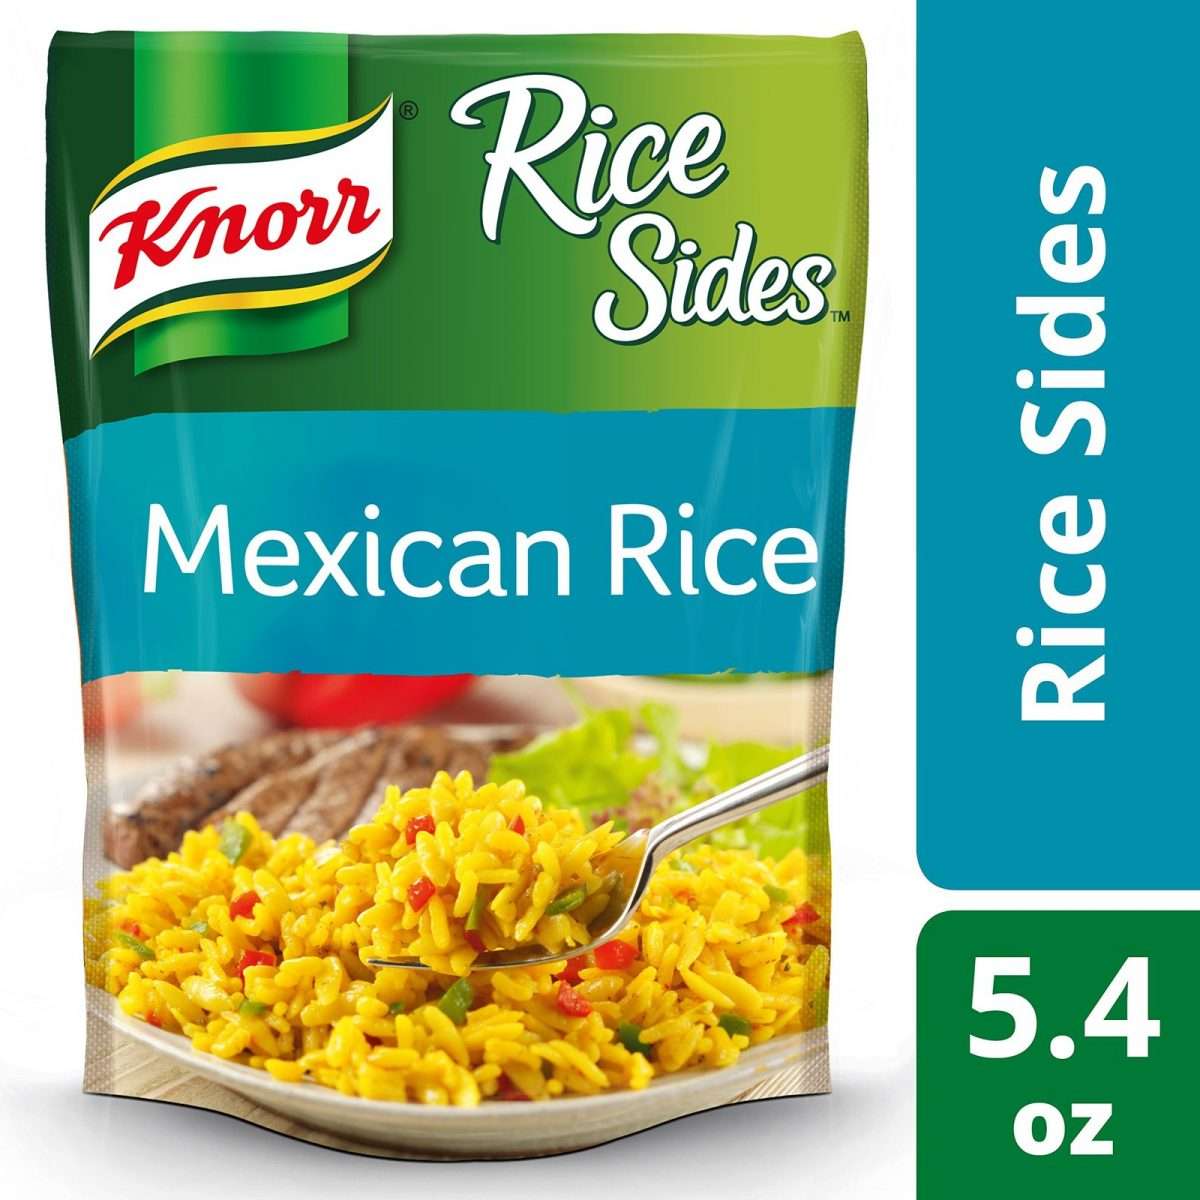 Knorr Fiesta Side Dish, Mexican Rice, 5.4 oz